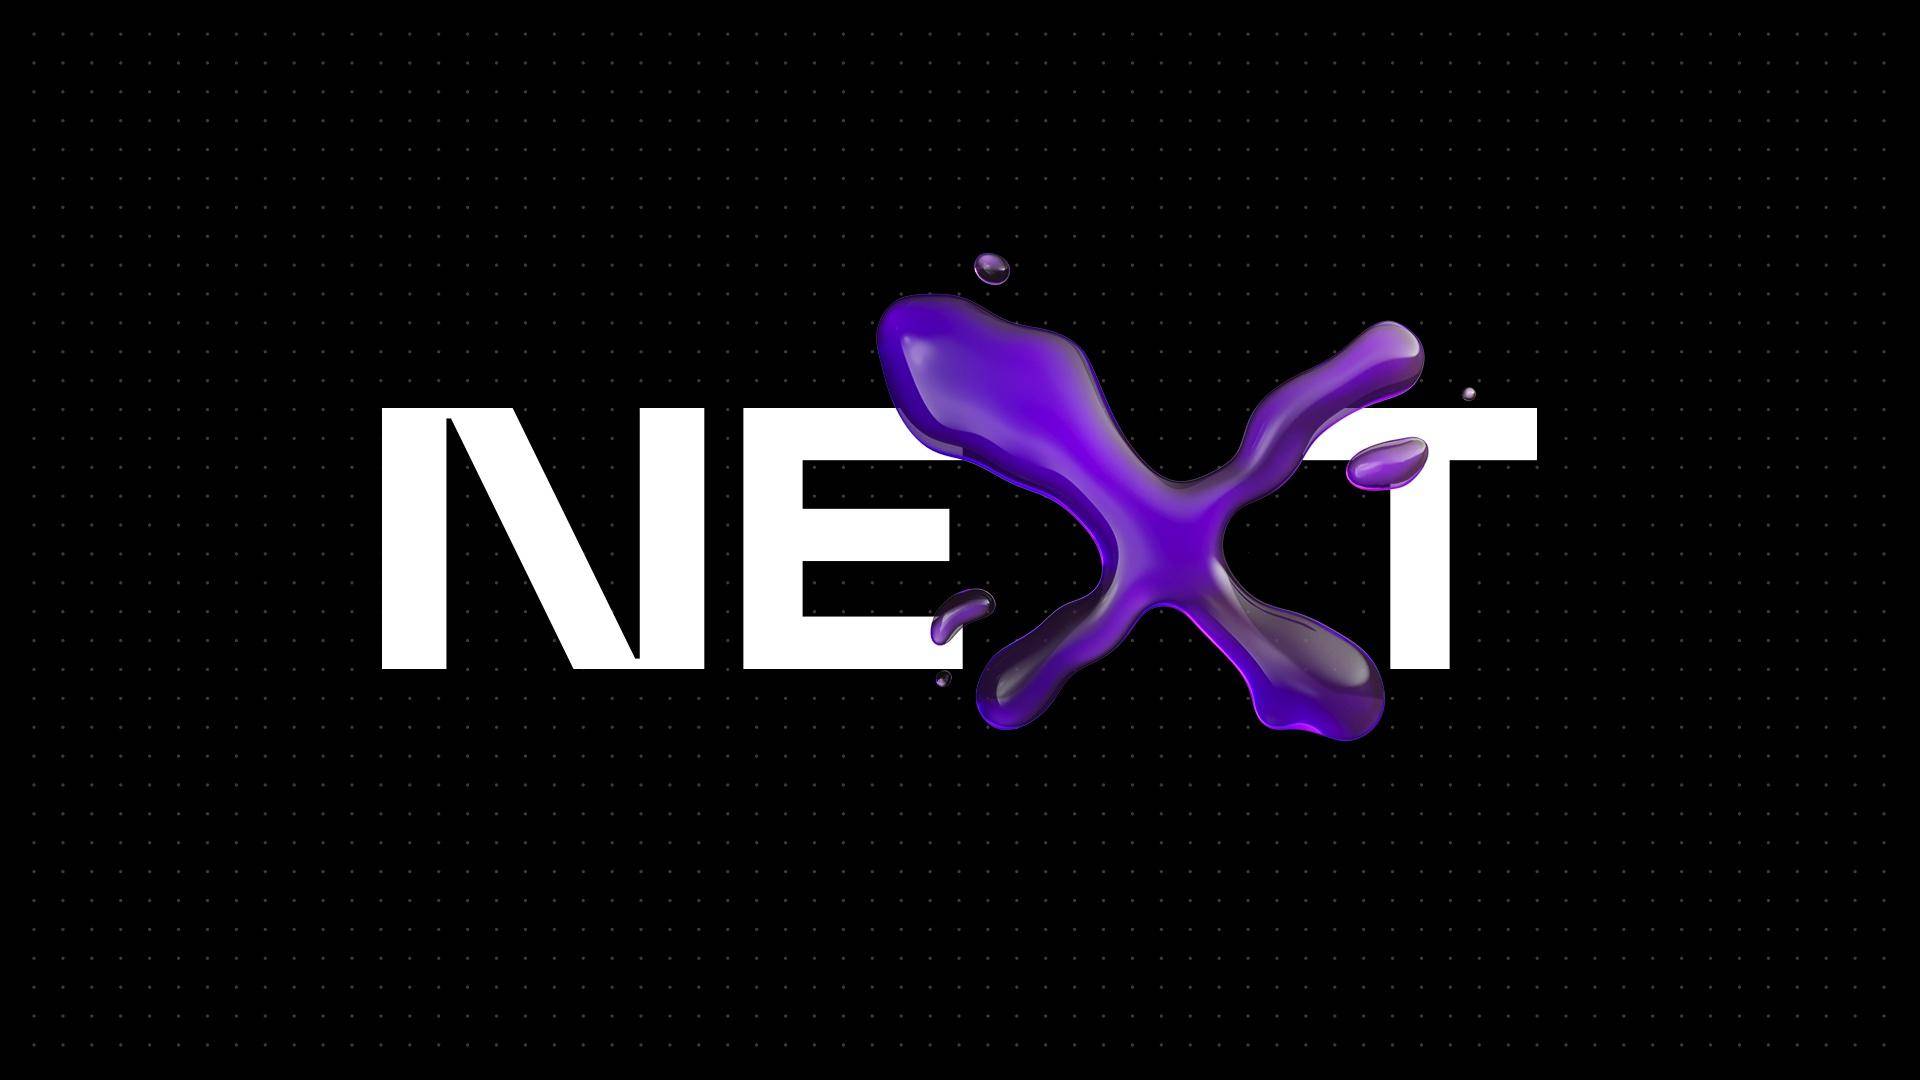 The TBWA NEXT logo with a purple 3D letter X